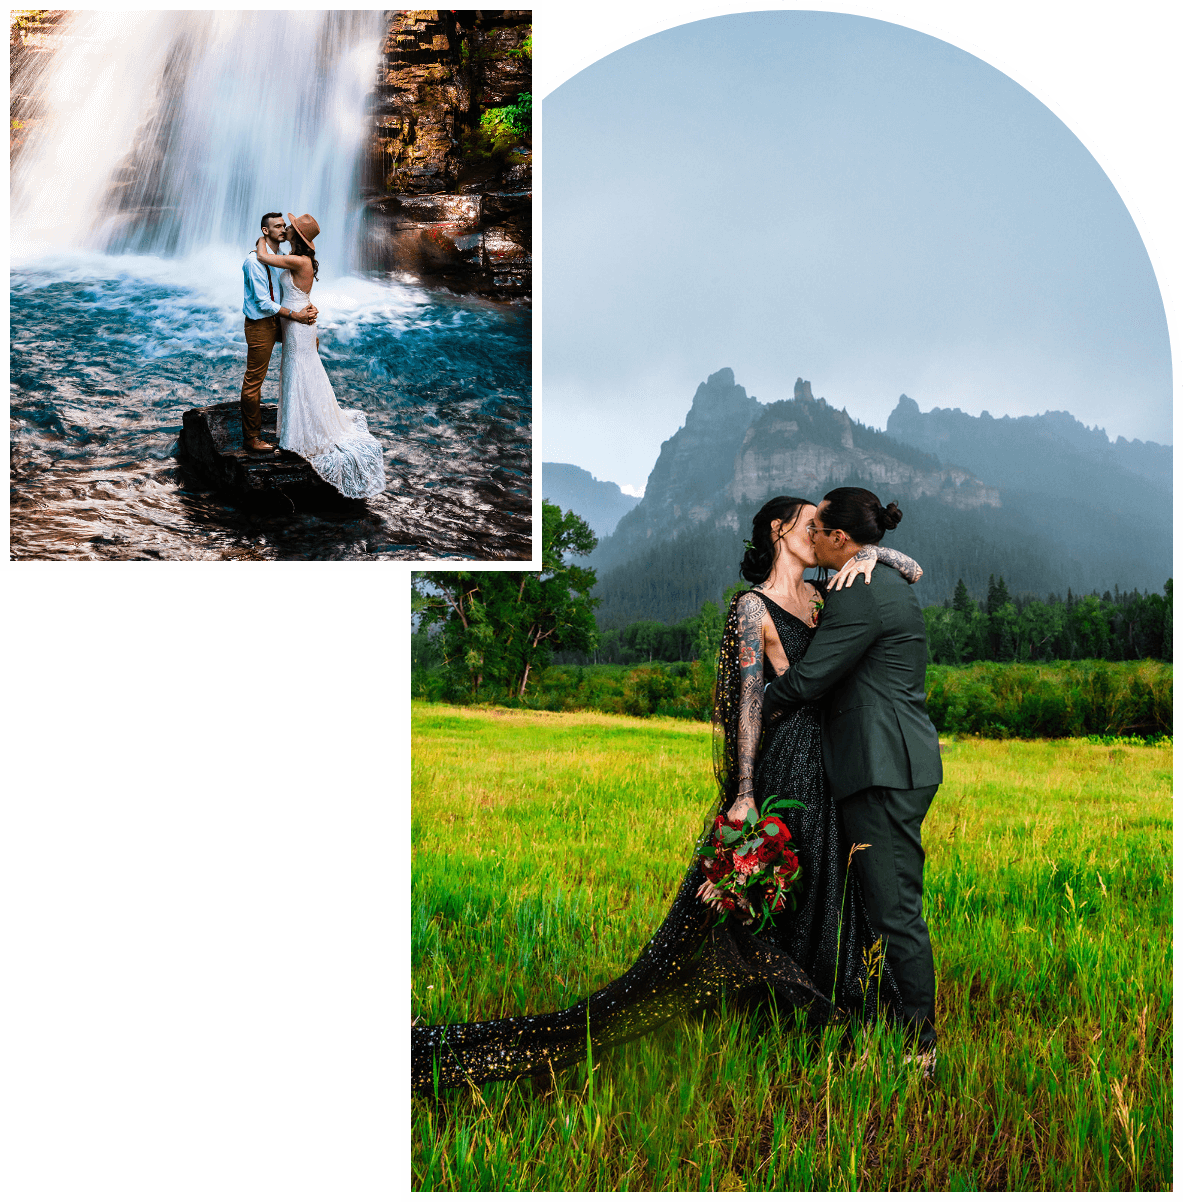 1: a bride and groom kiss standing on a rock in front of a waterfall 2: a bride and groom kiss standing in a field